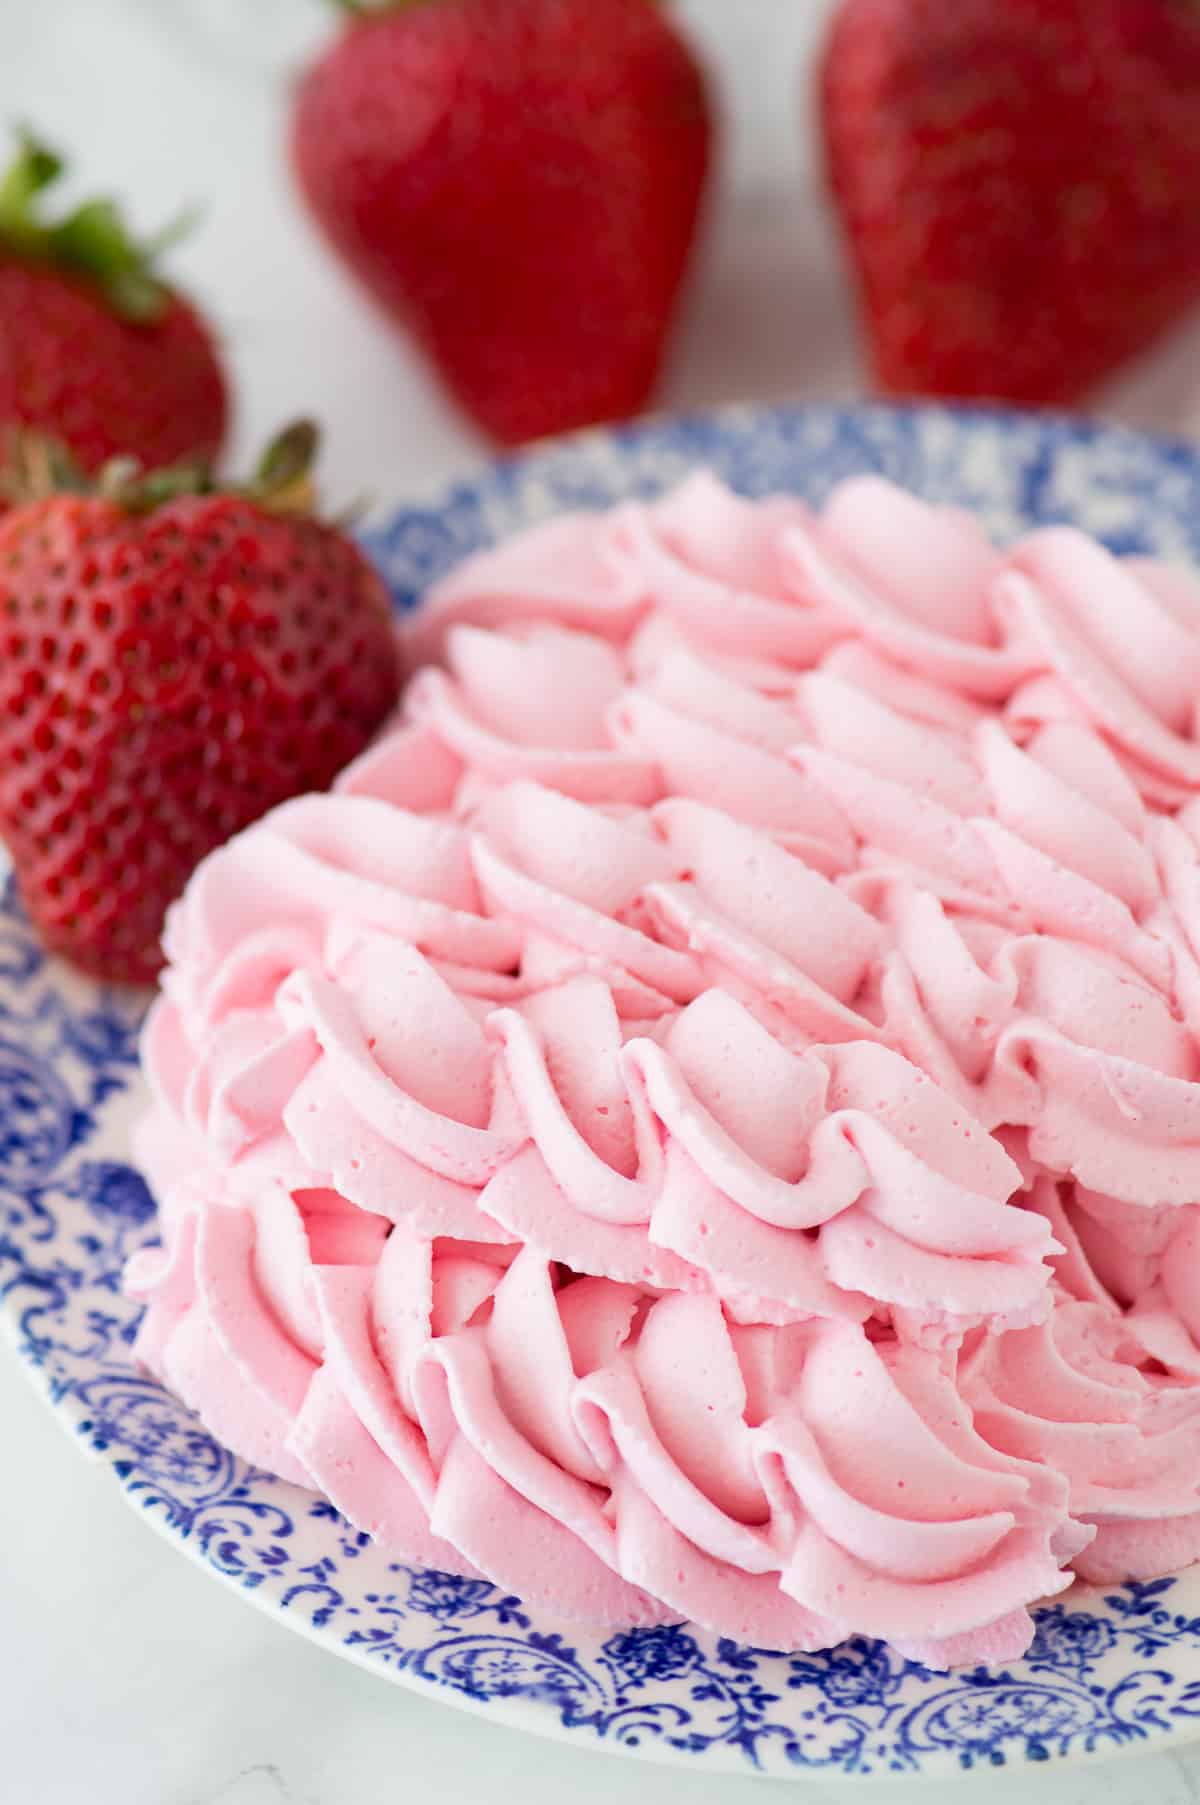 strawberry whipped cream piped onto blue floral plate with strawberries in the background